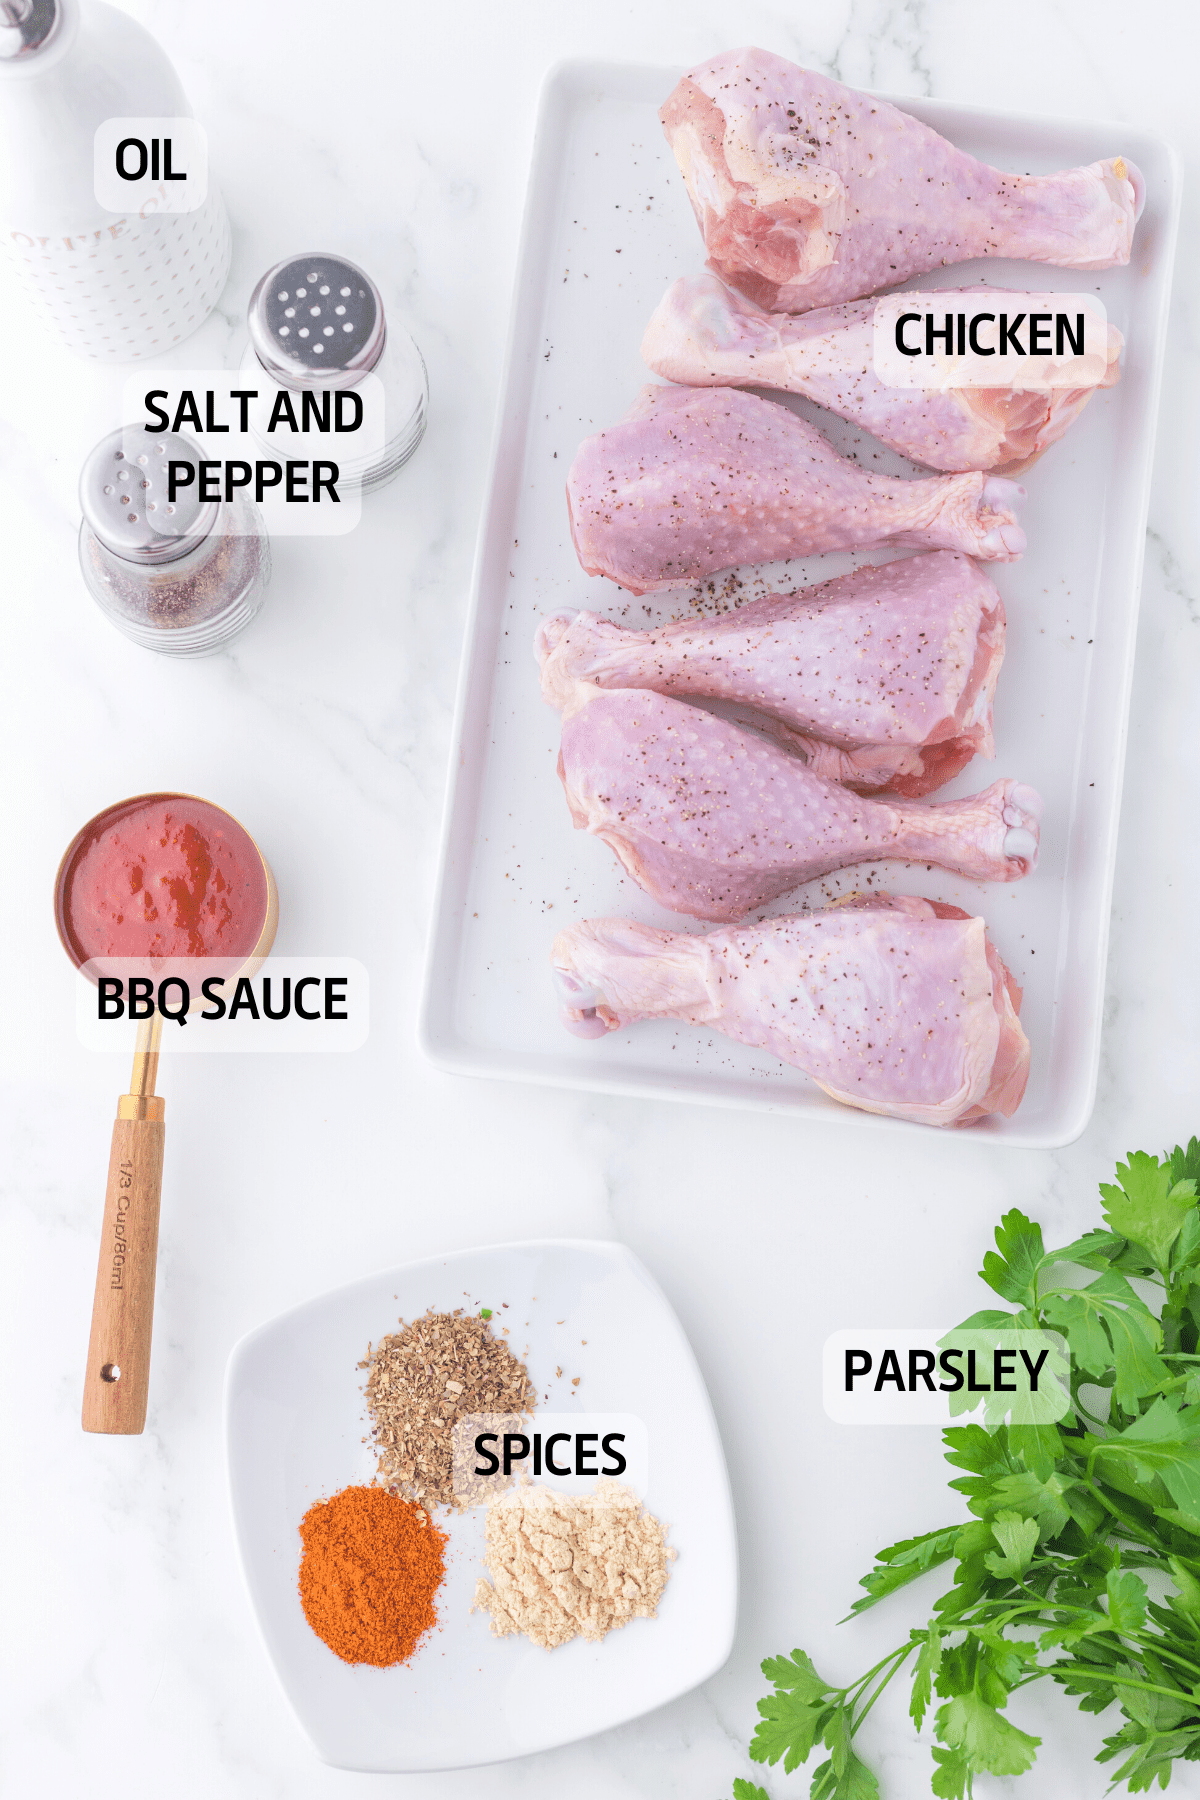 the ingredients you need to make this recipes
chicken drumsticks with skin
chili
oregano     
garlic powder
salt
black pepper
olive oil
 barbecue sauce
 parsley 
nonstick cooking spray